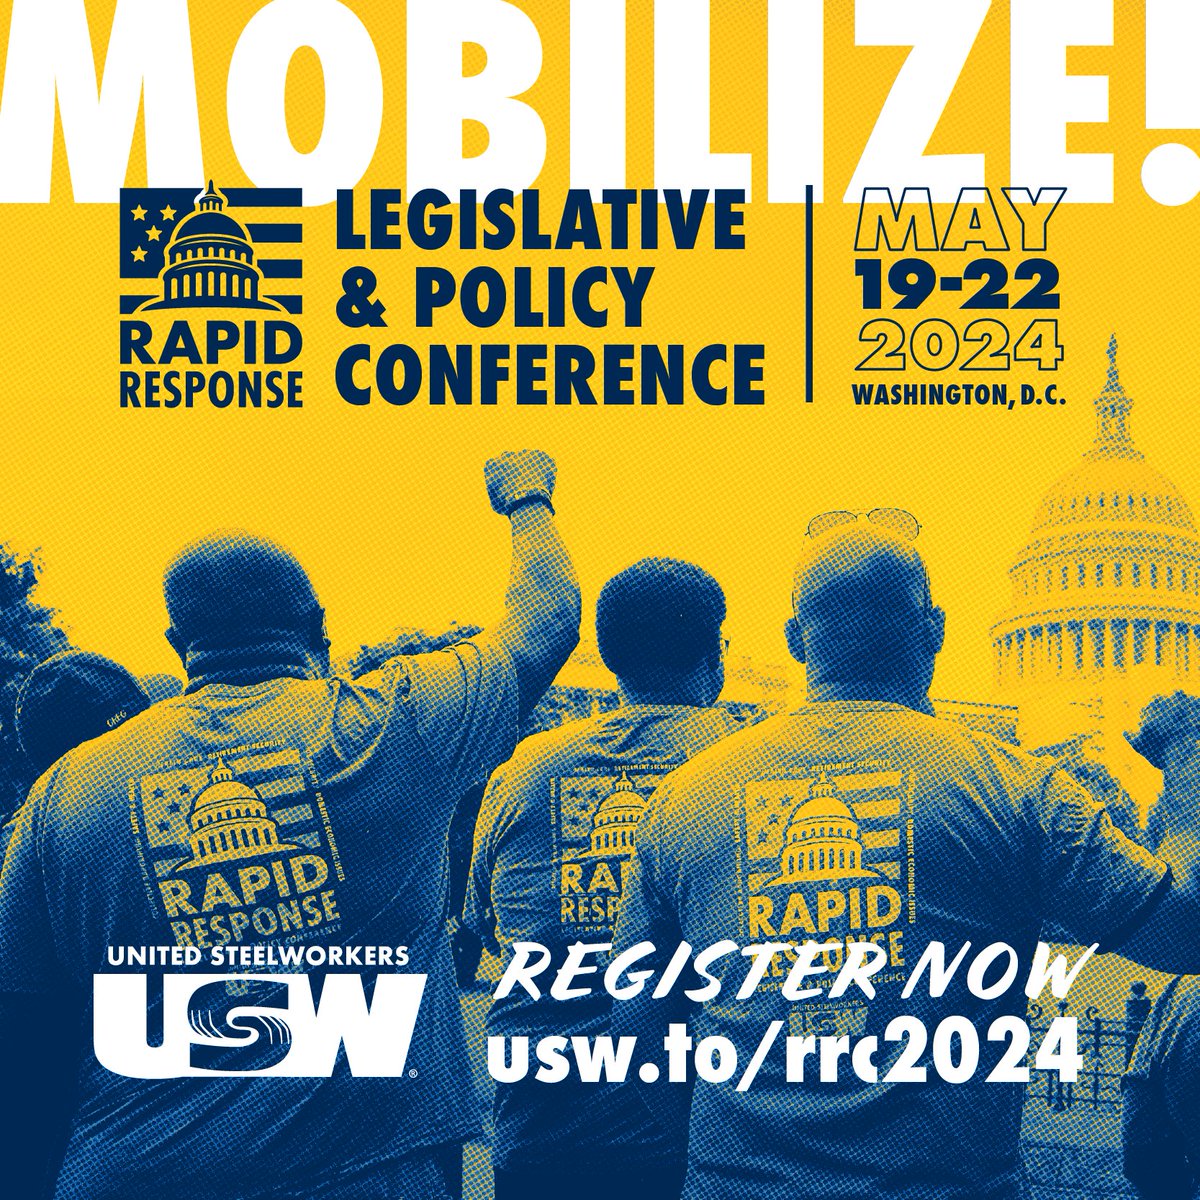 🚨 Steelworkers! We are 9 days away from the 2024 Rapid Response, Legislative & Policy Conference registration deadline on April 19! We are nearing capacity for our room block, so if you haven’t booked yet, please do ASAP! Find out more at usw.to/rrc2024. #USWRR24